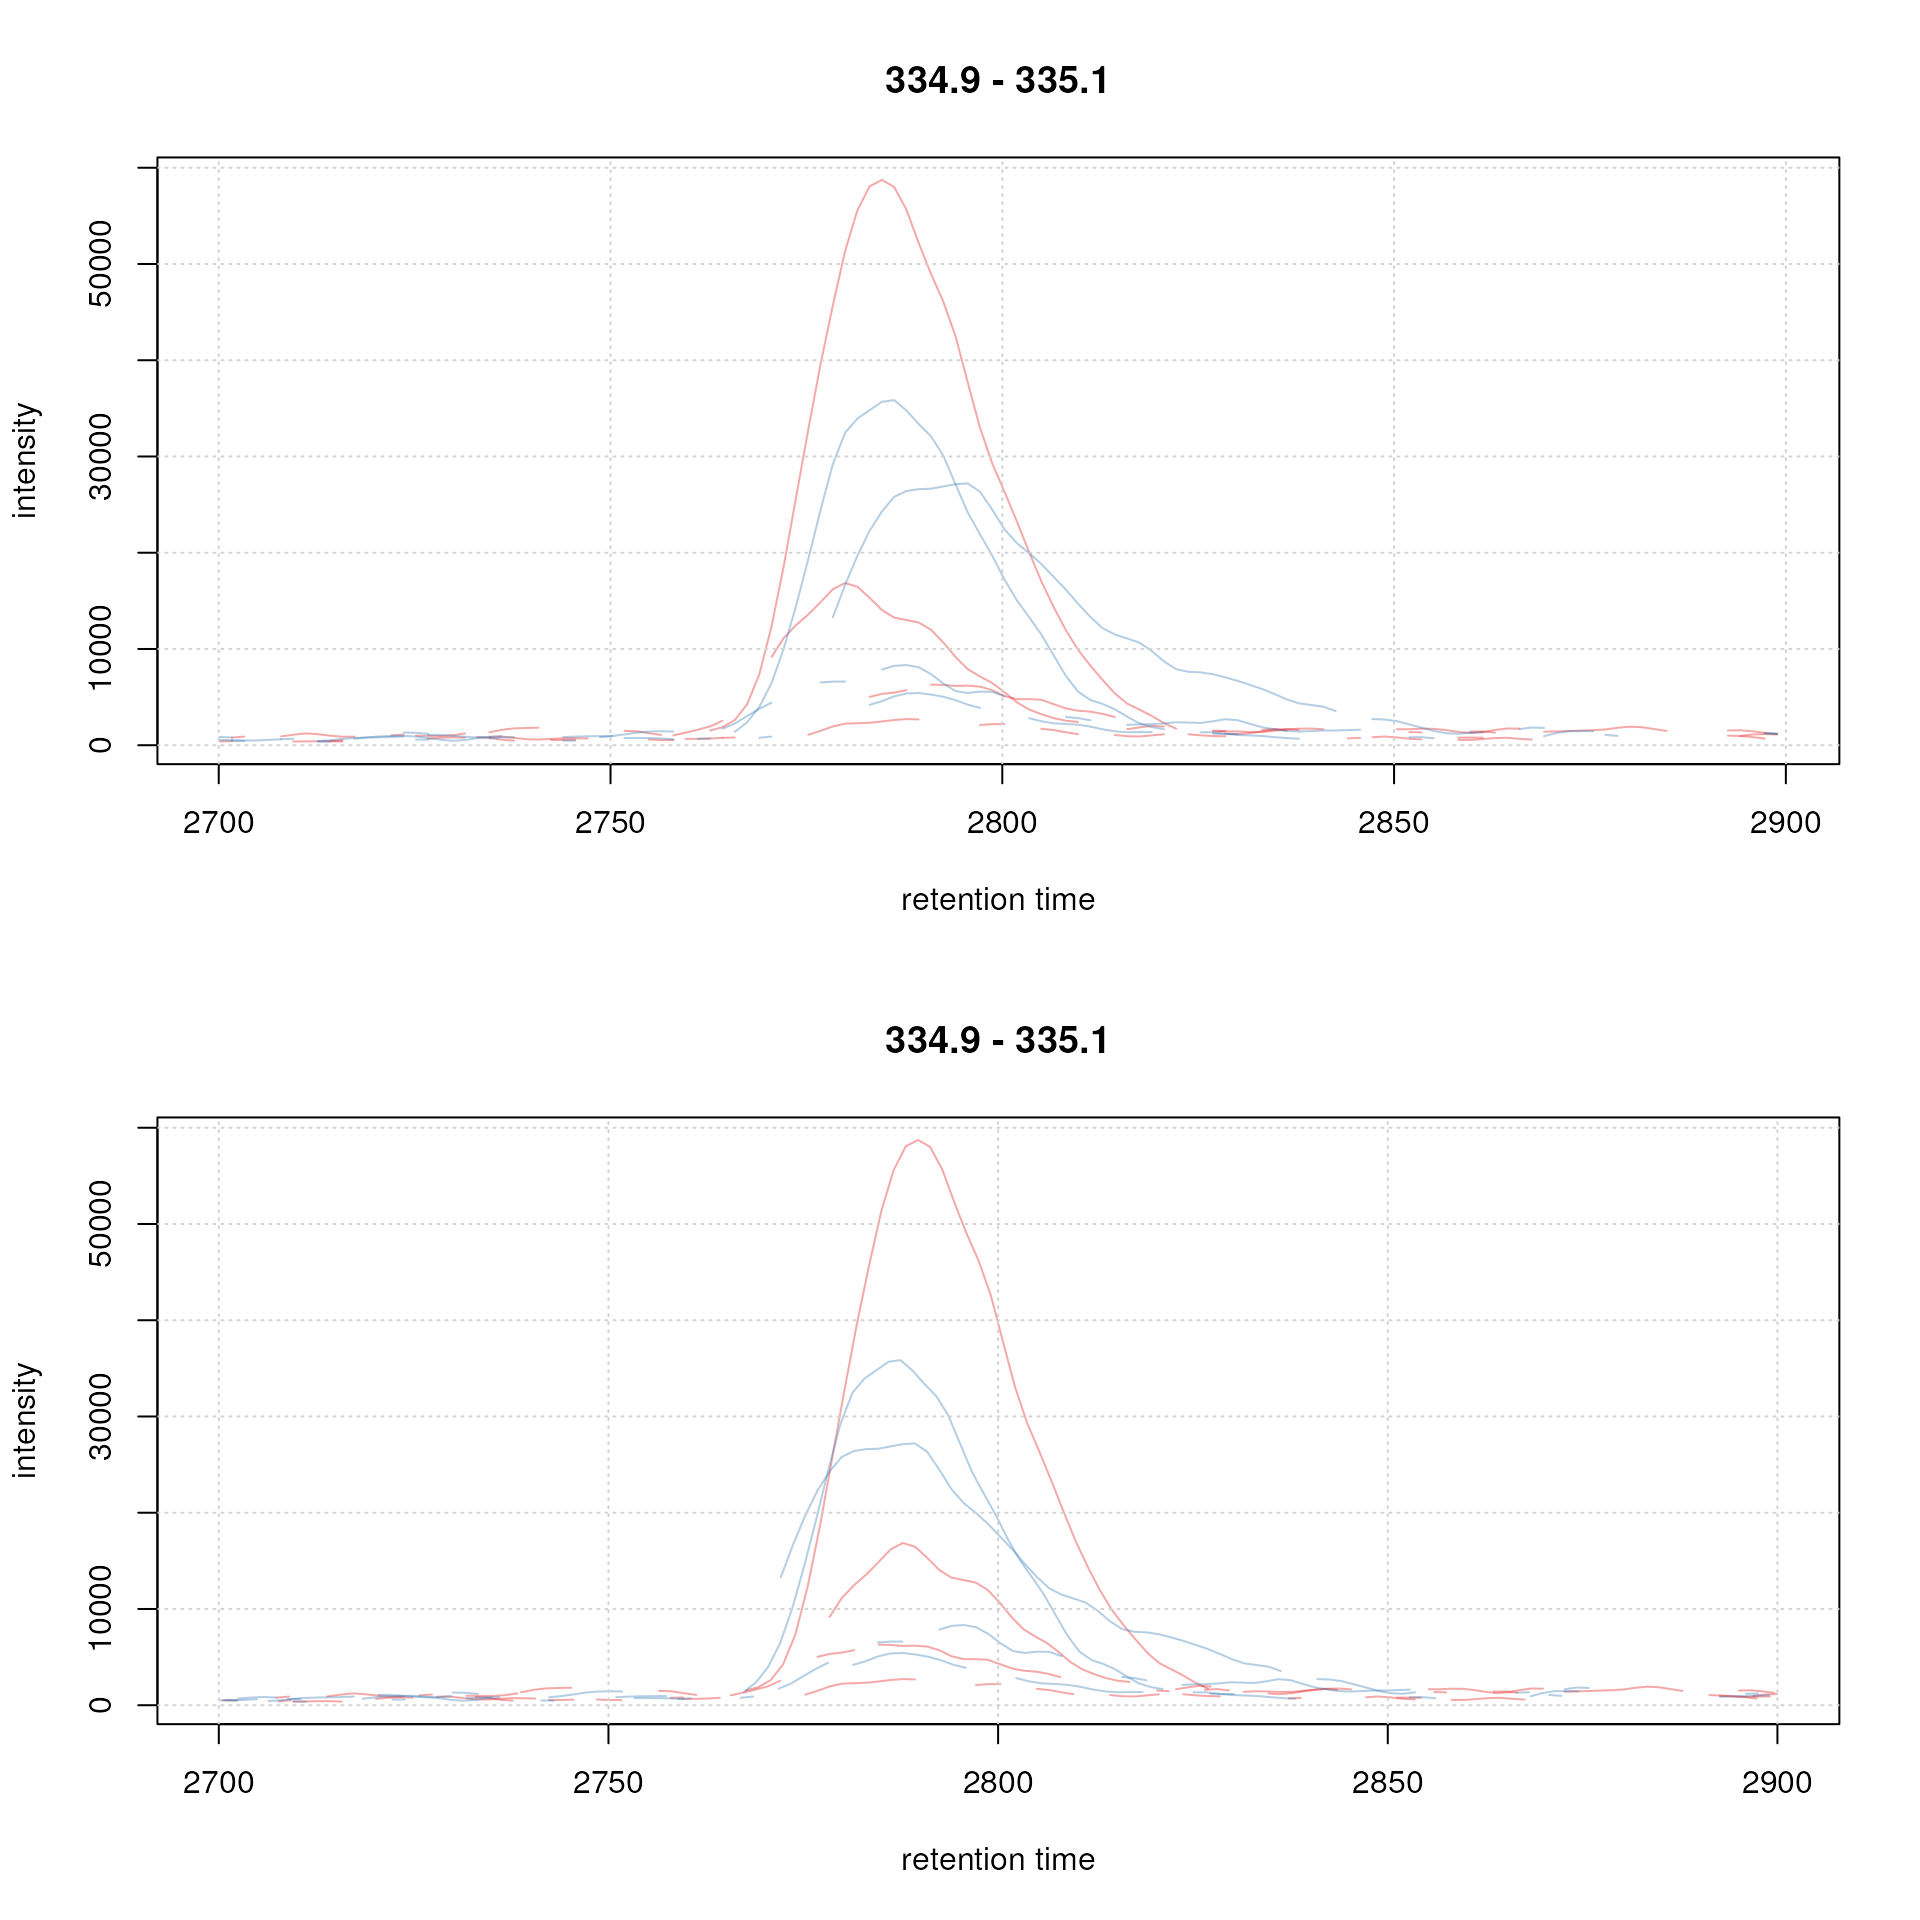 Example extracted ion chromatogram before (top) and after alignment (bottom).